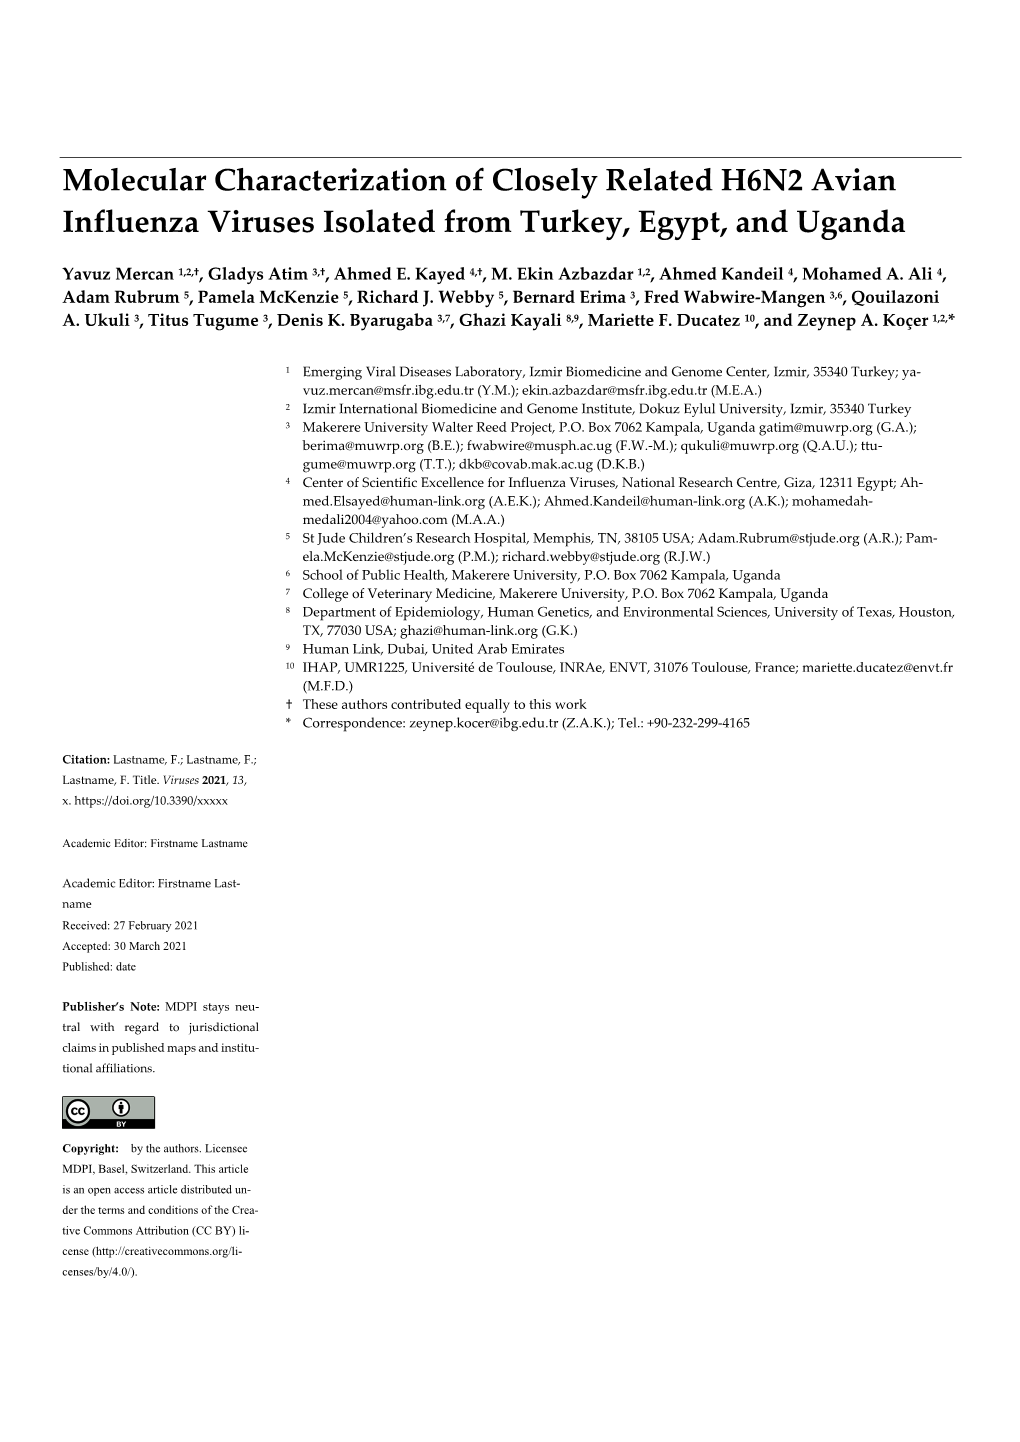 Molecular Characterization of Closely Related H6N2 Avian Influenza Viruses Isolated from Turkey, Egypt, and Uganda